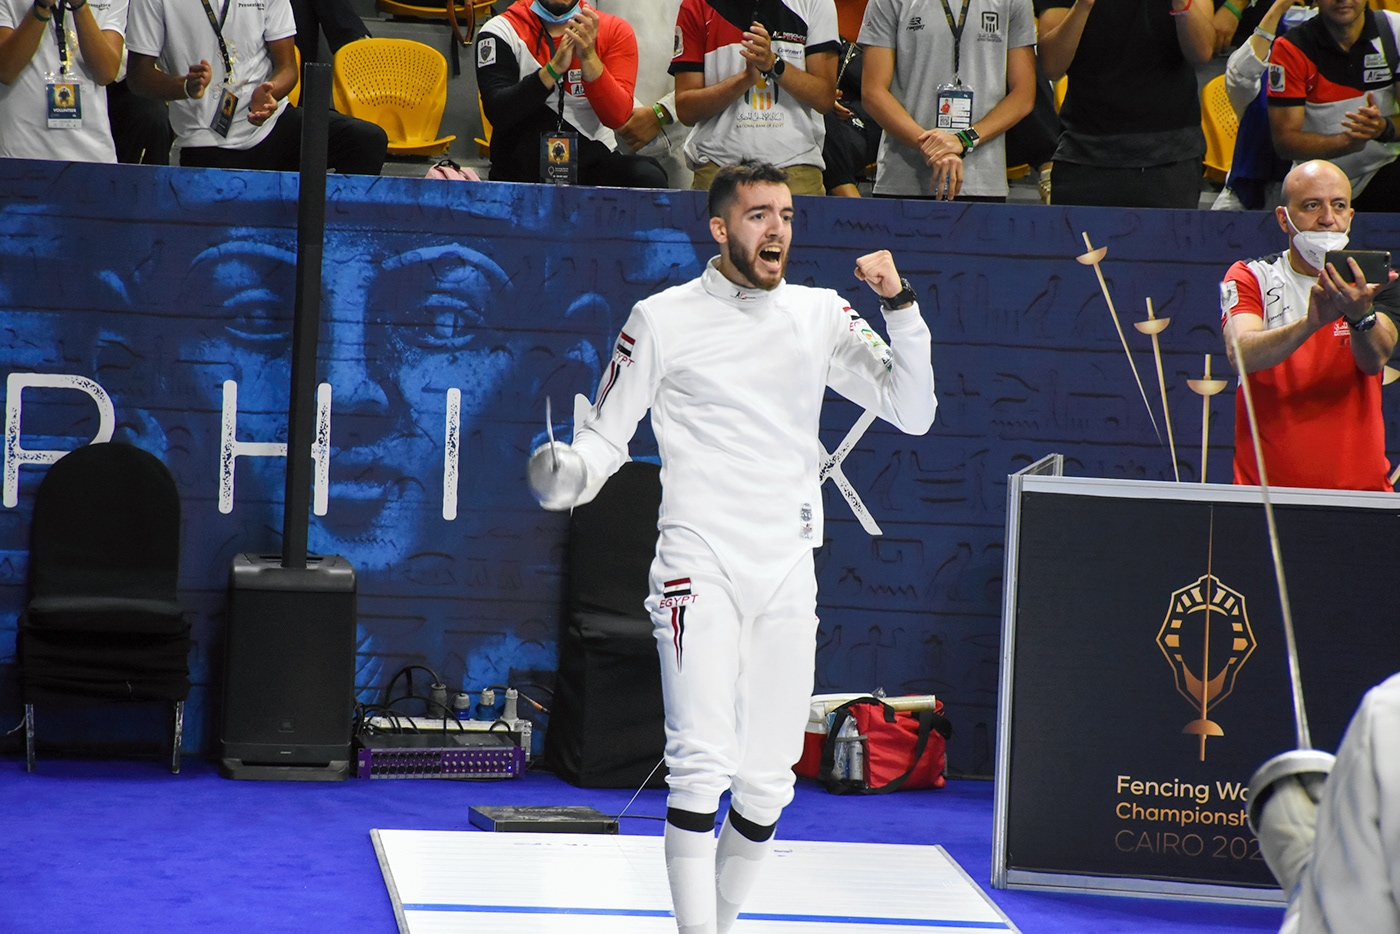 athletics egypt fencing Olympic Games sports sport sportphotography Championship sports photography world championship